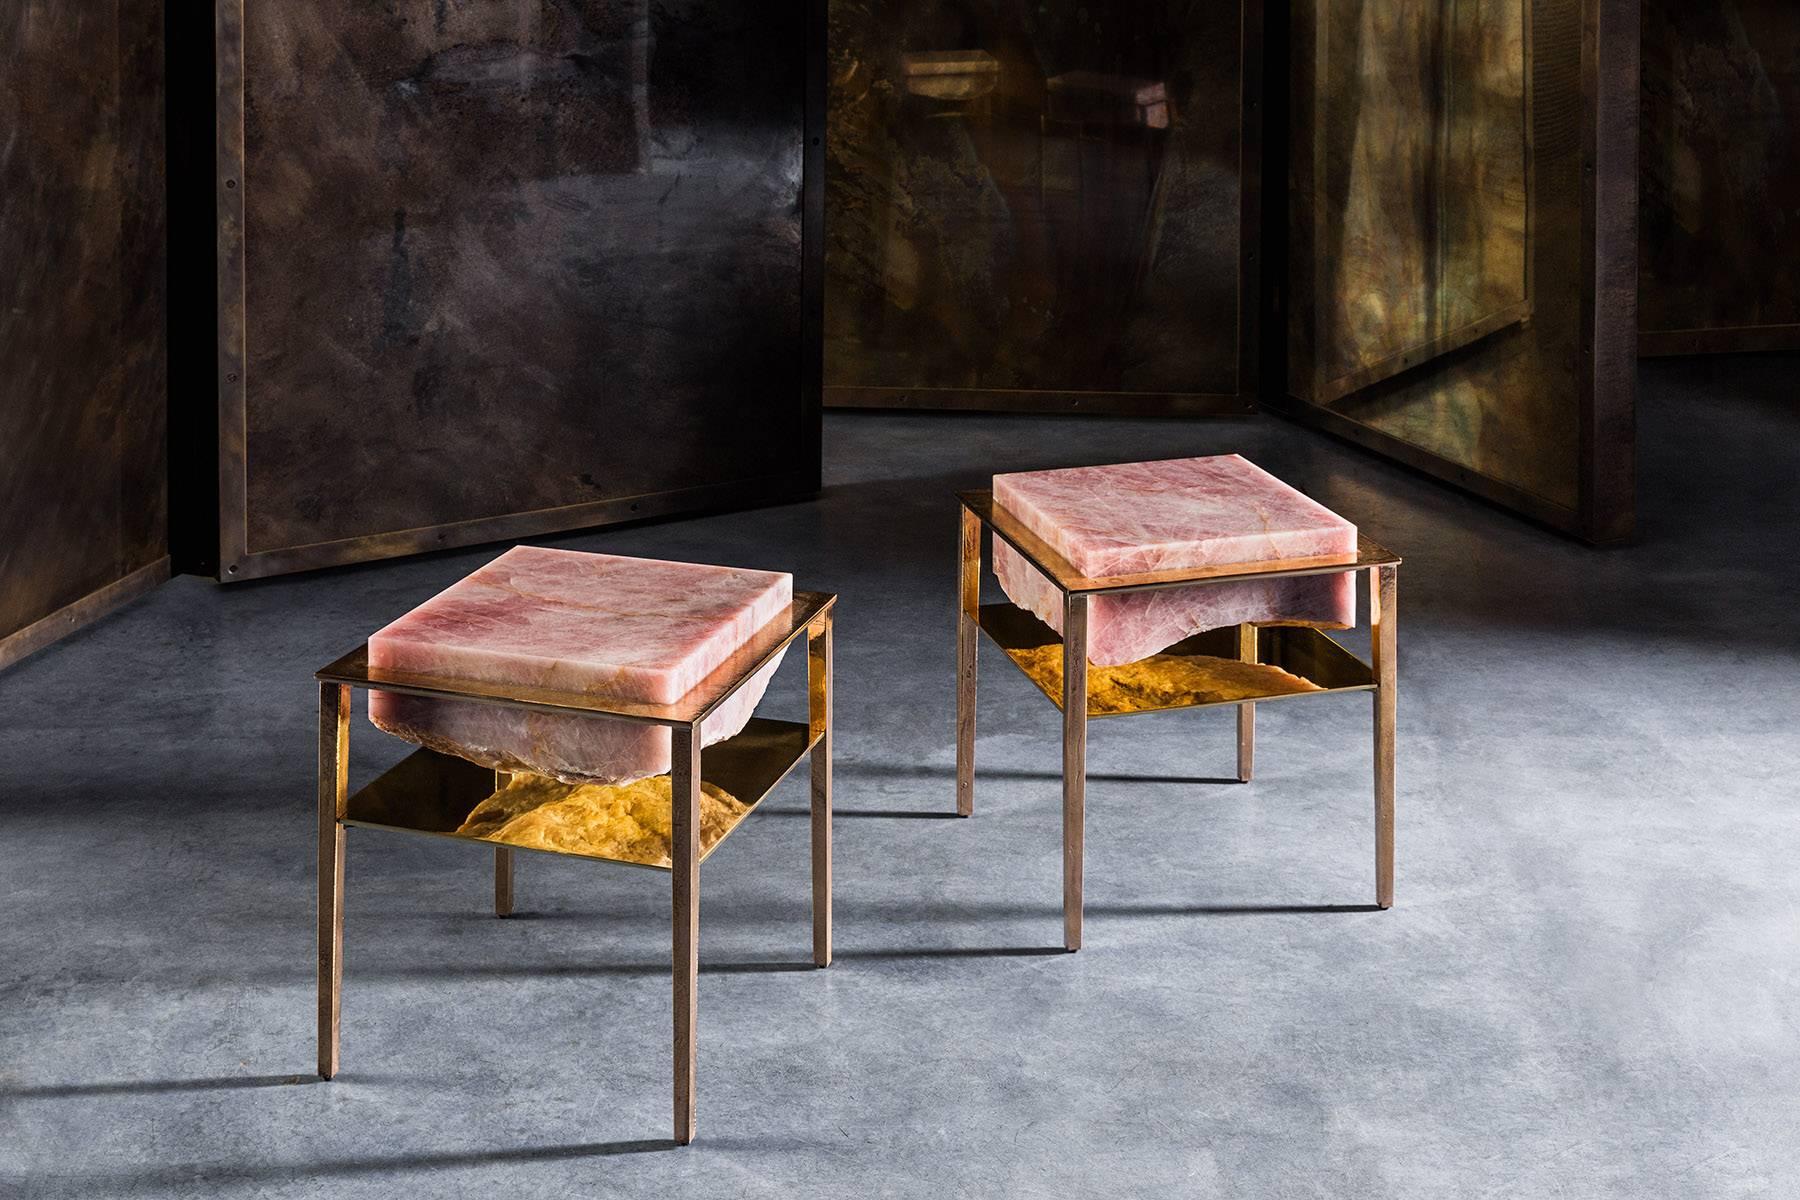 Each of these unique tables by acclaimed artist and master-craftsman, Gianluca Pacchioni, is handcrafted at the sculptor's studio in Milan. Slabs of individually sourced and hand-hewn pink onyx are suspended mid-air by uncannily thin legs. 

A